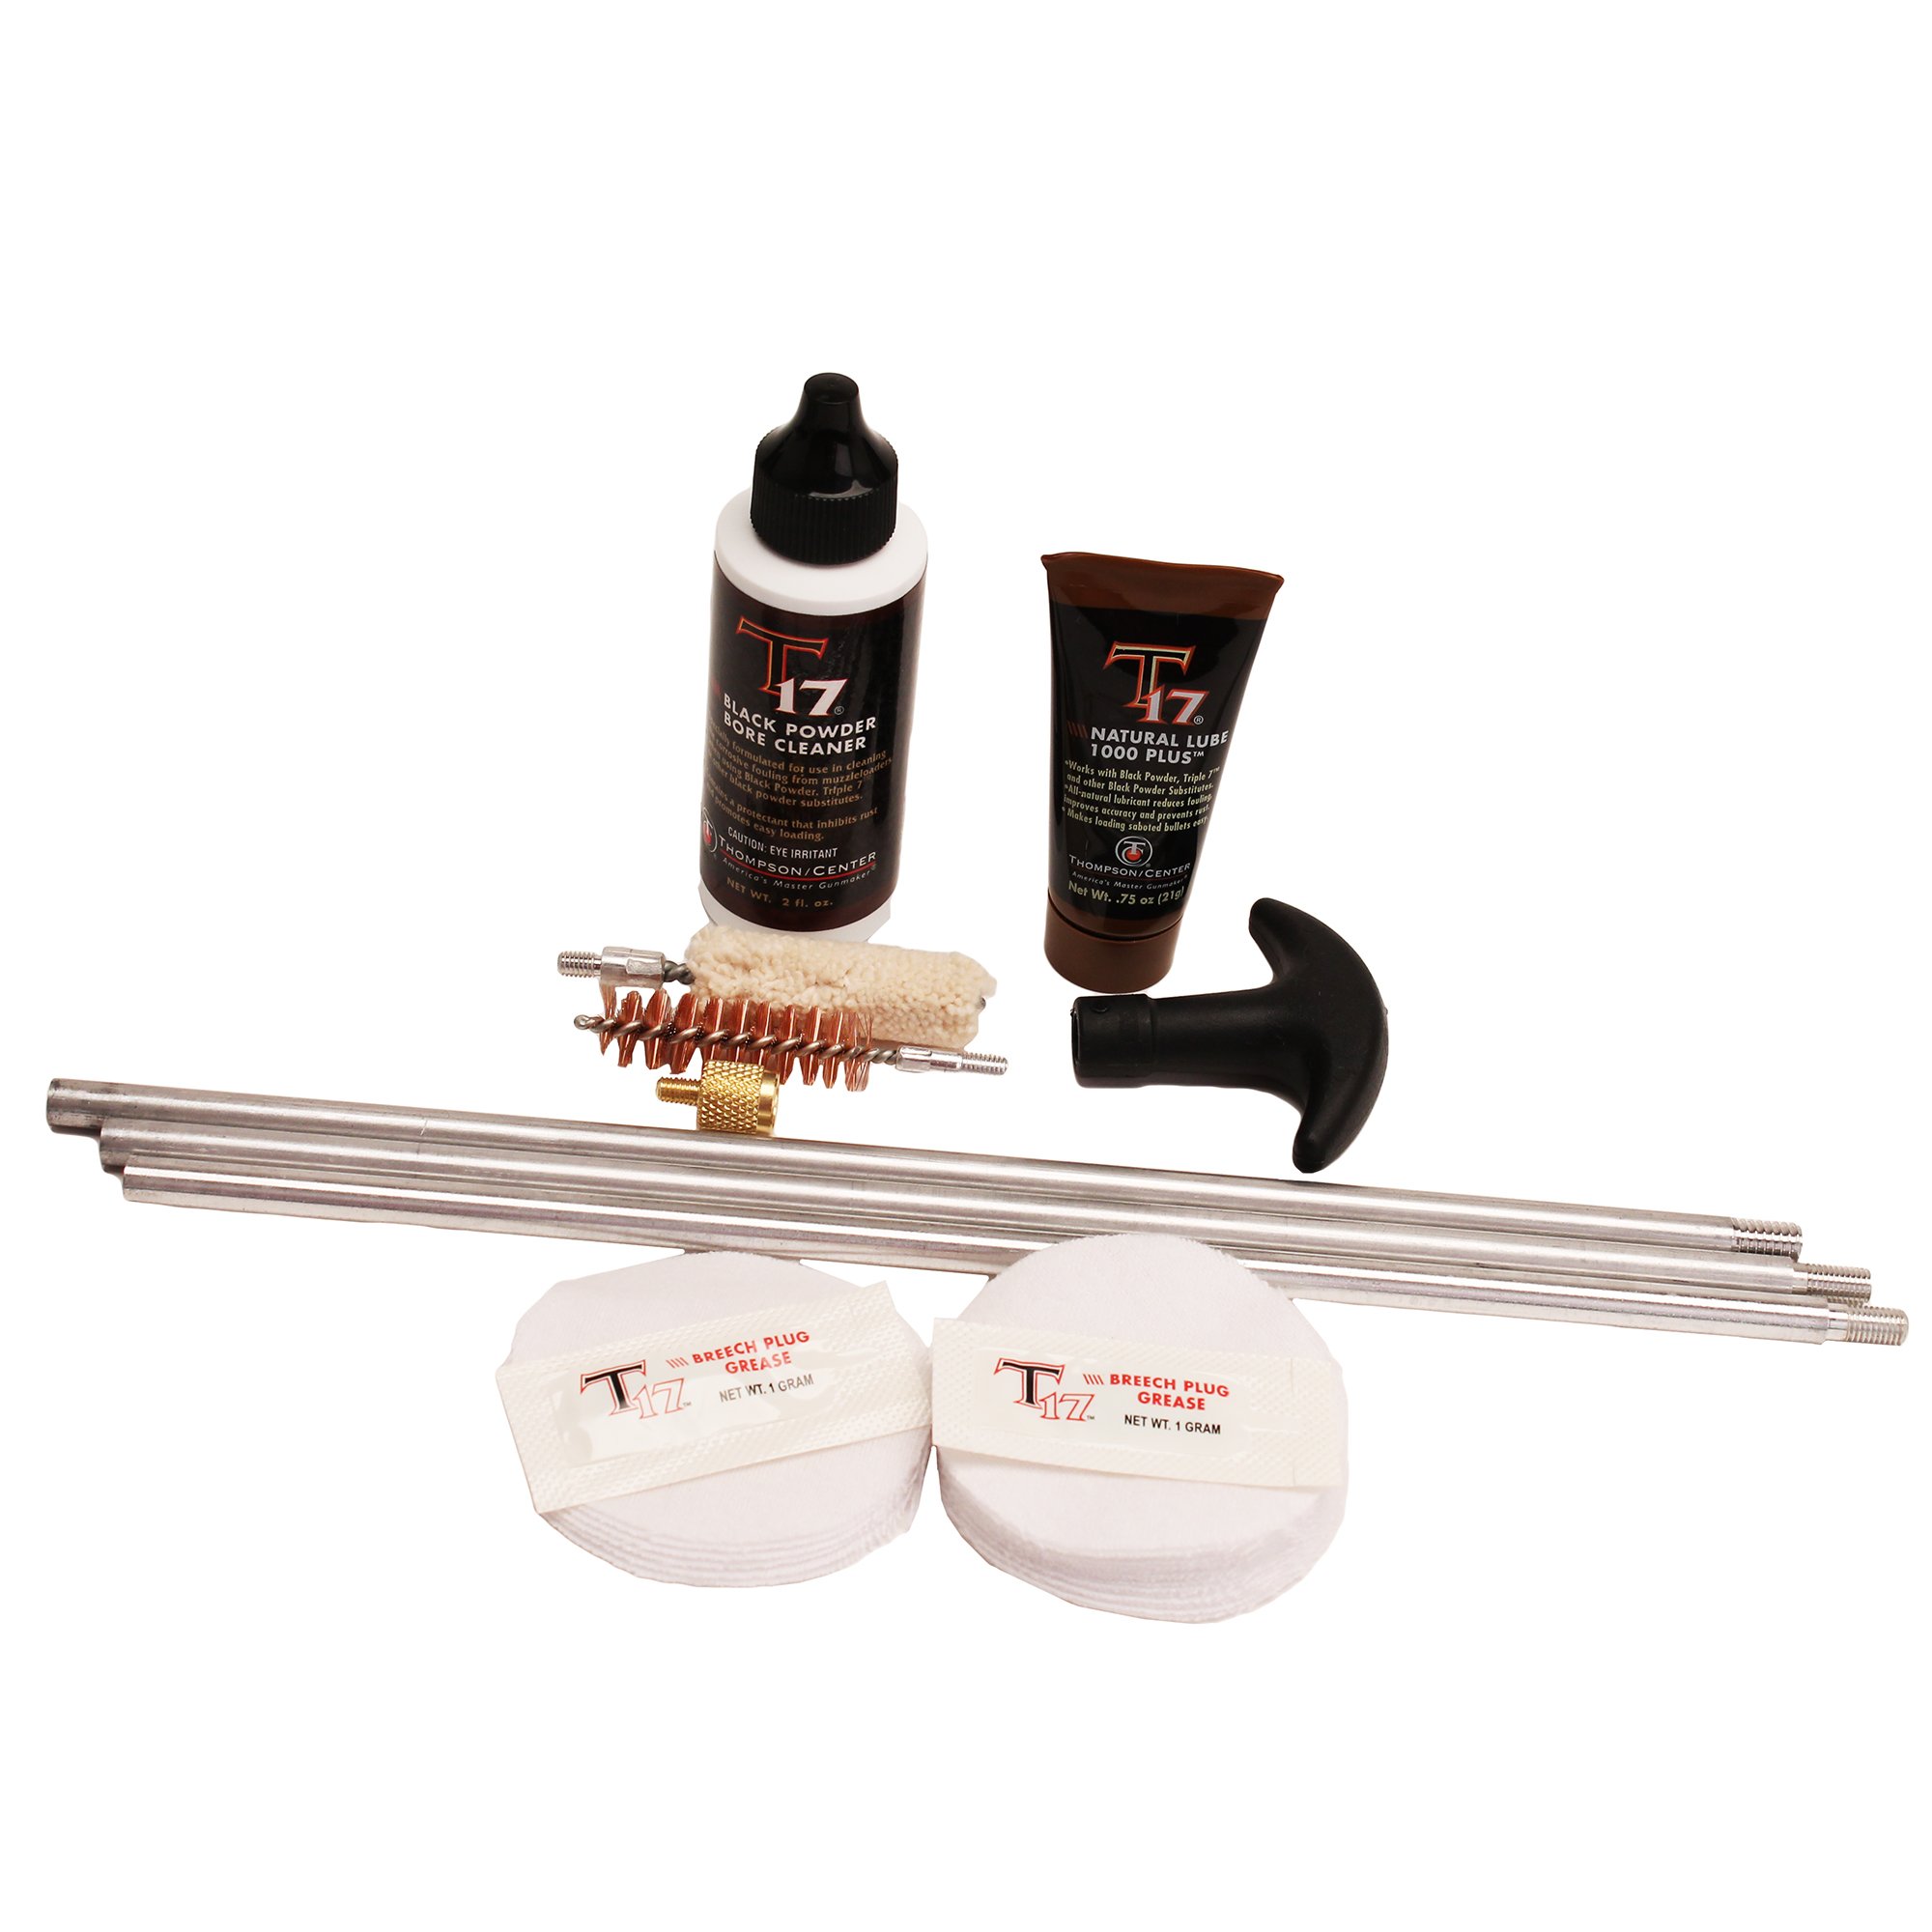 Thompson Center T17 Black Powder Cleaning Kit w Collapsible Cleaning Rod, T17 Natural Lube, Bore Cleaner Solvent, Breech Plug Grease, .50 Cal Jag Cleaning Patches $10.99 Amazon